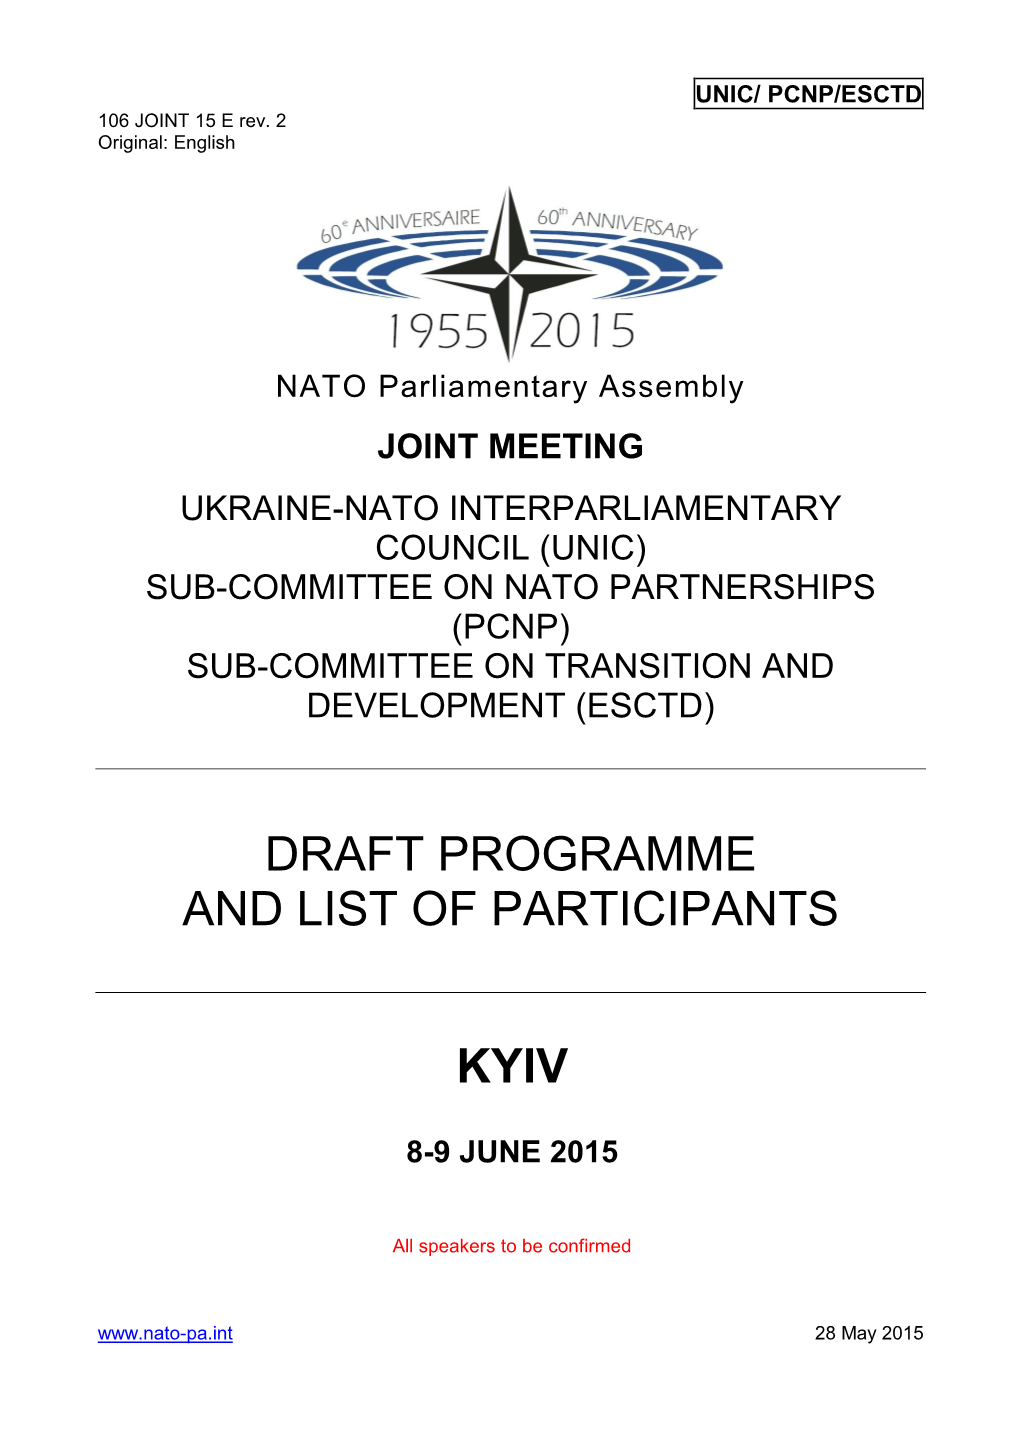 Draft Programme and List of Participants Kyiv